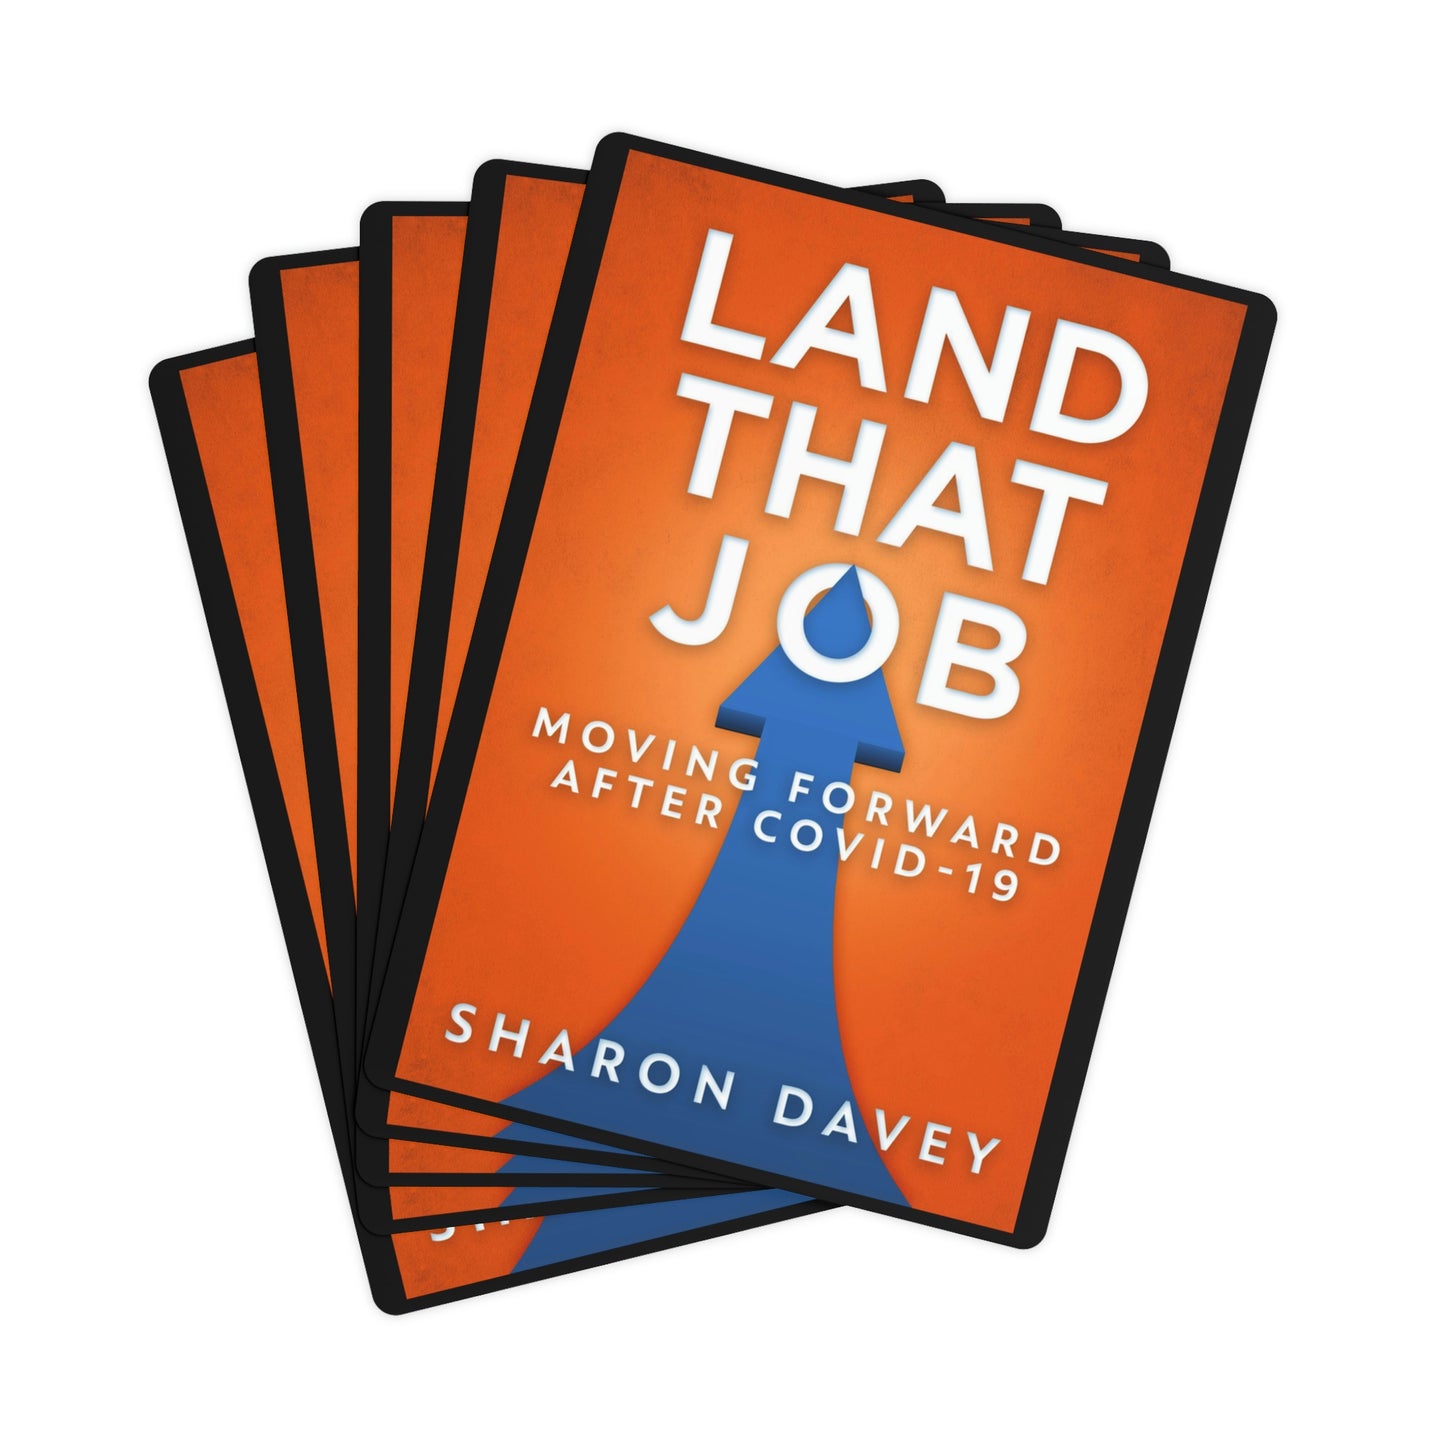 Land That Job - Moving Forward After Covid-19 - Playing Cards